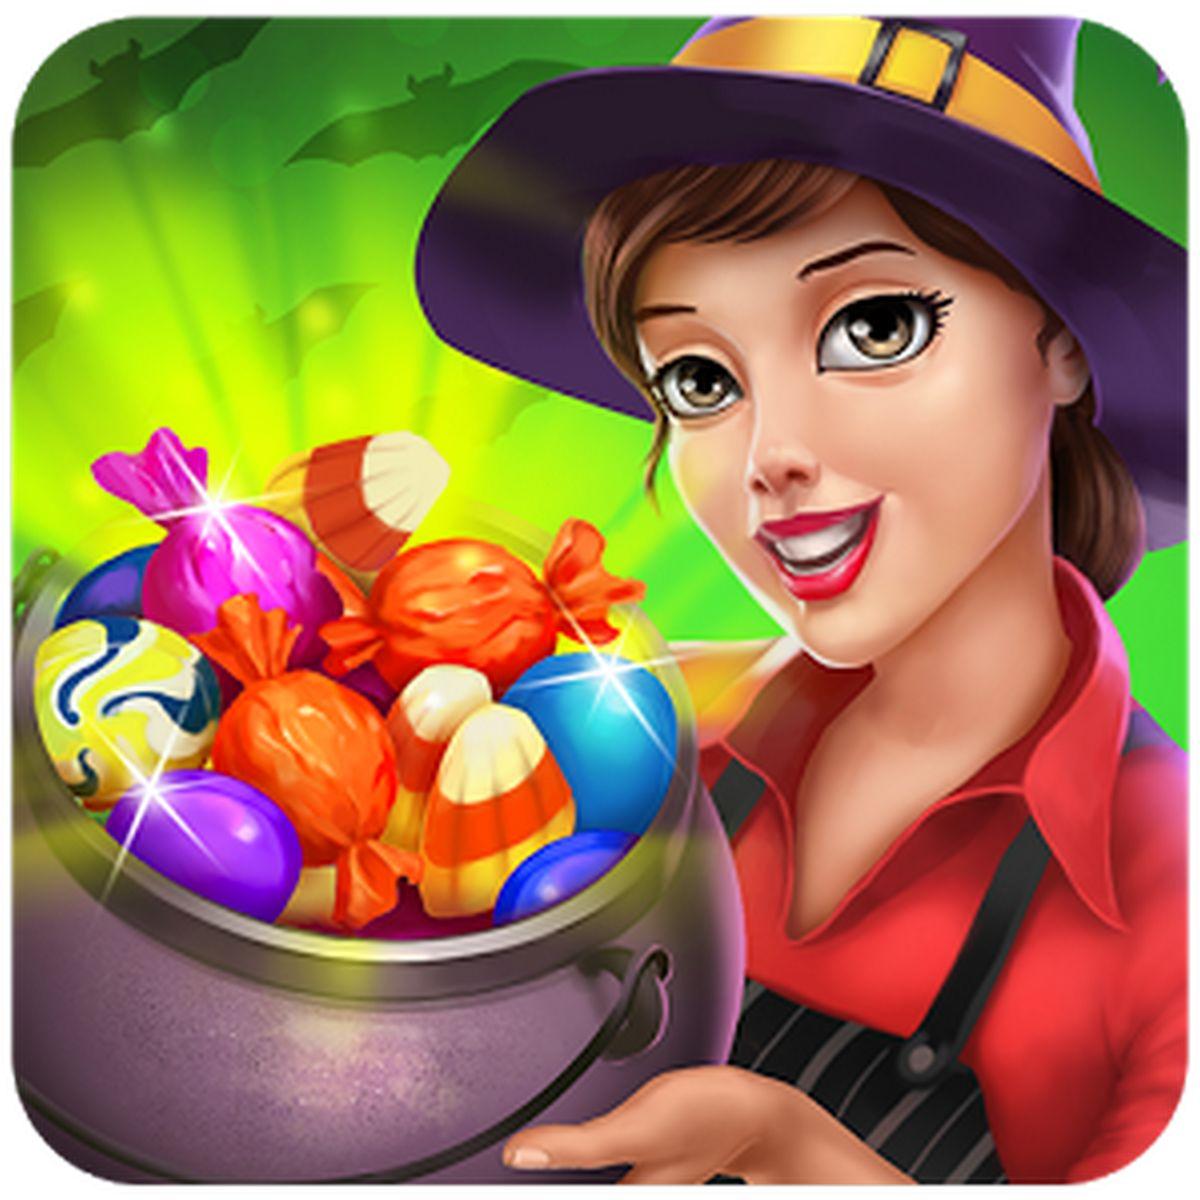 Food Truck Chef: Cooking Game APK MOD v1.9.9 (Dinero infinito) icon